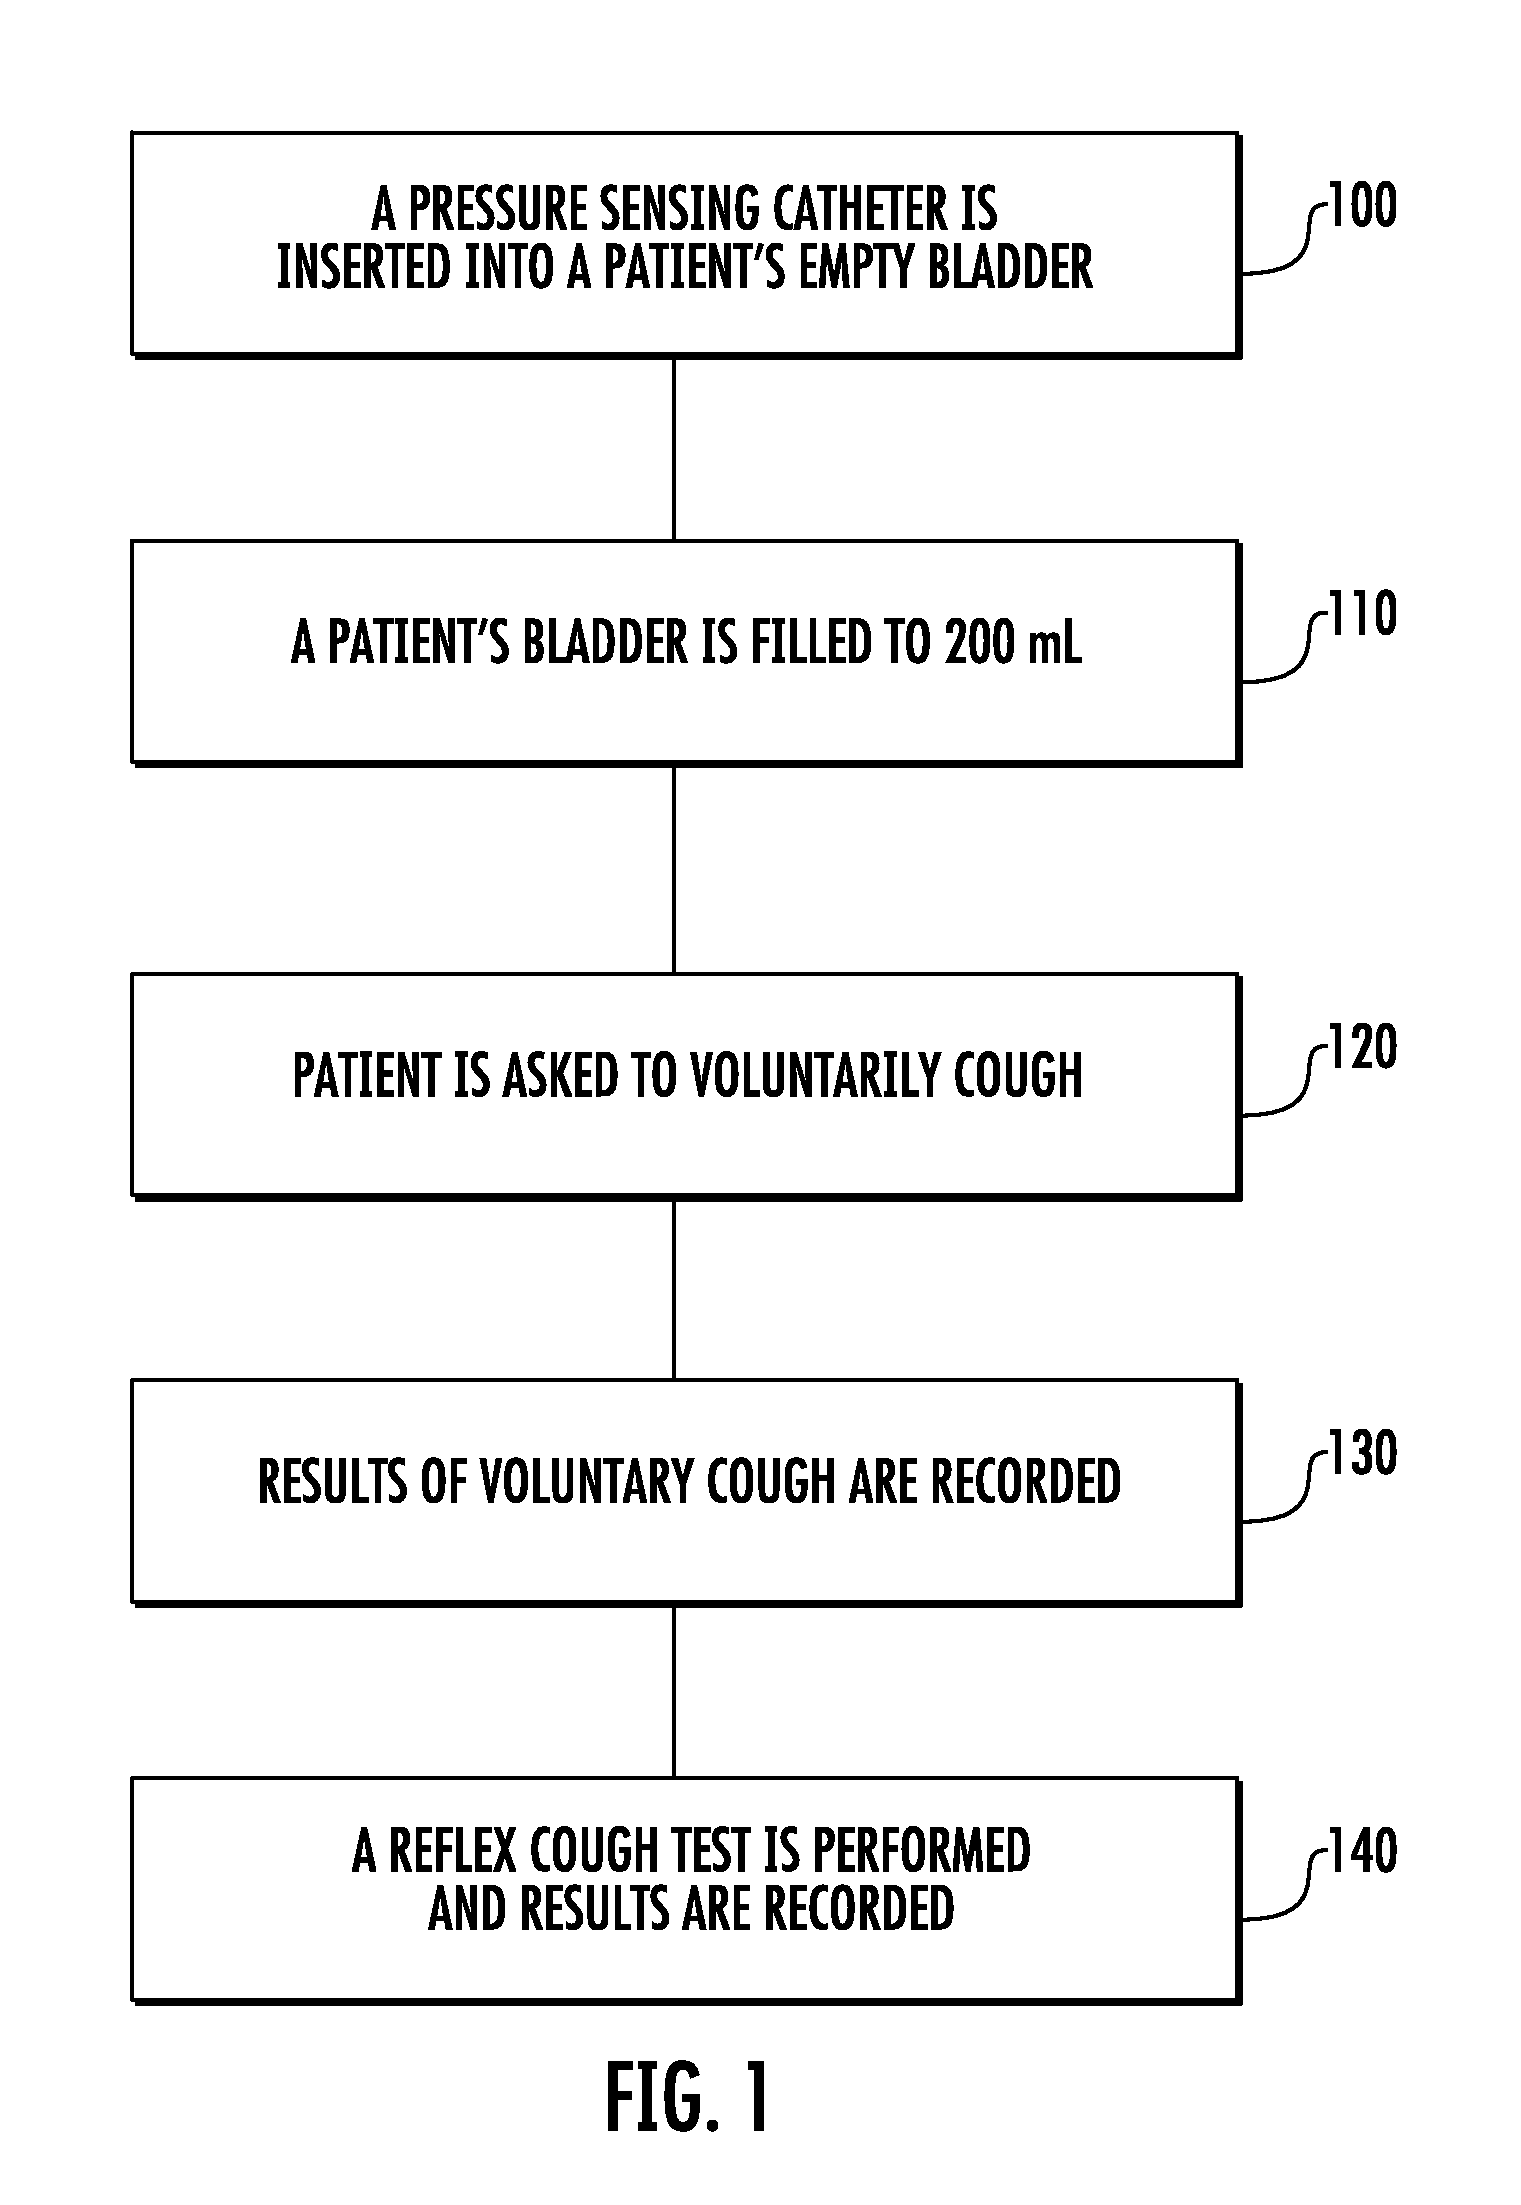 Techniques for evaluating urinary stress incontinence and use of involuntary reflex cough as a medical diagnostic tool